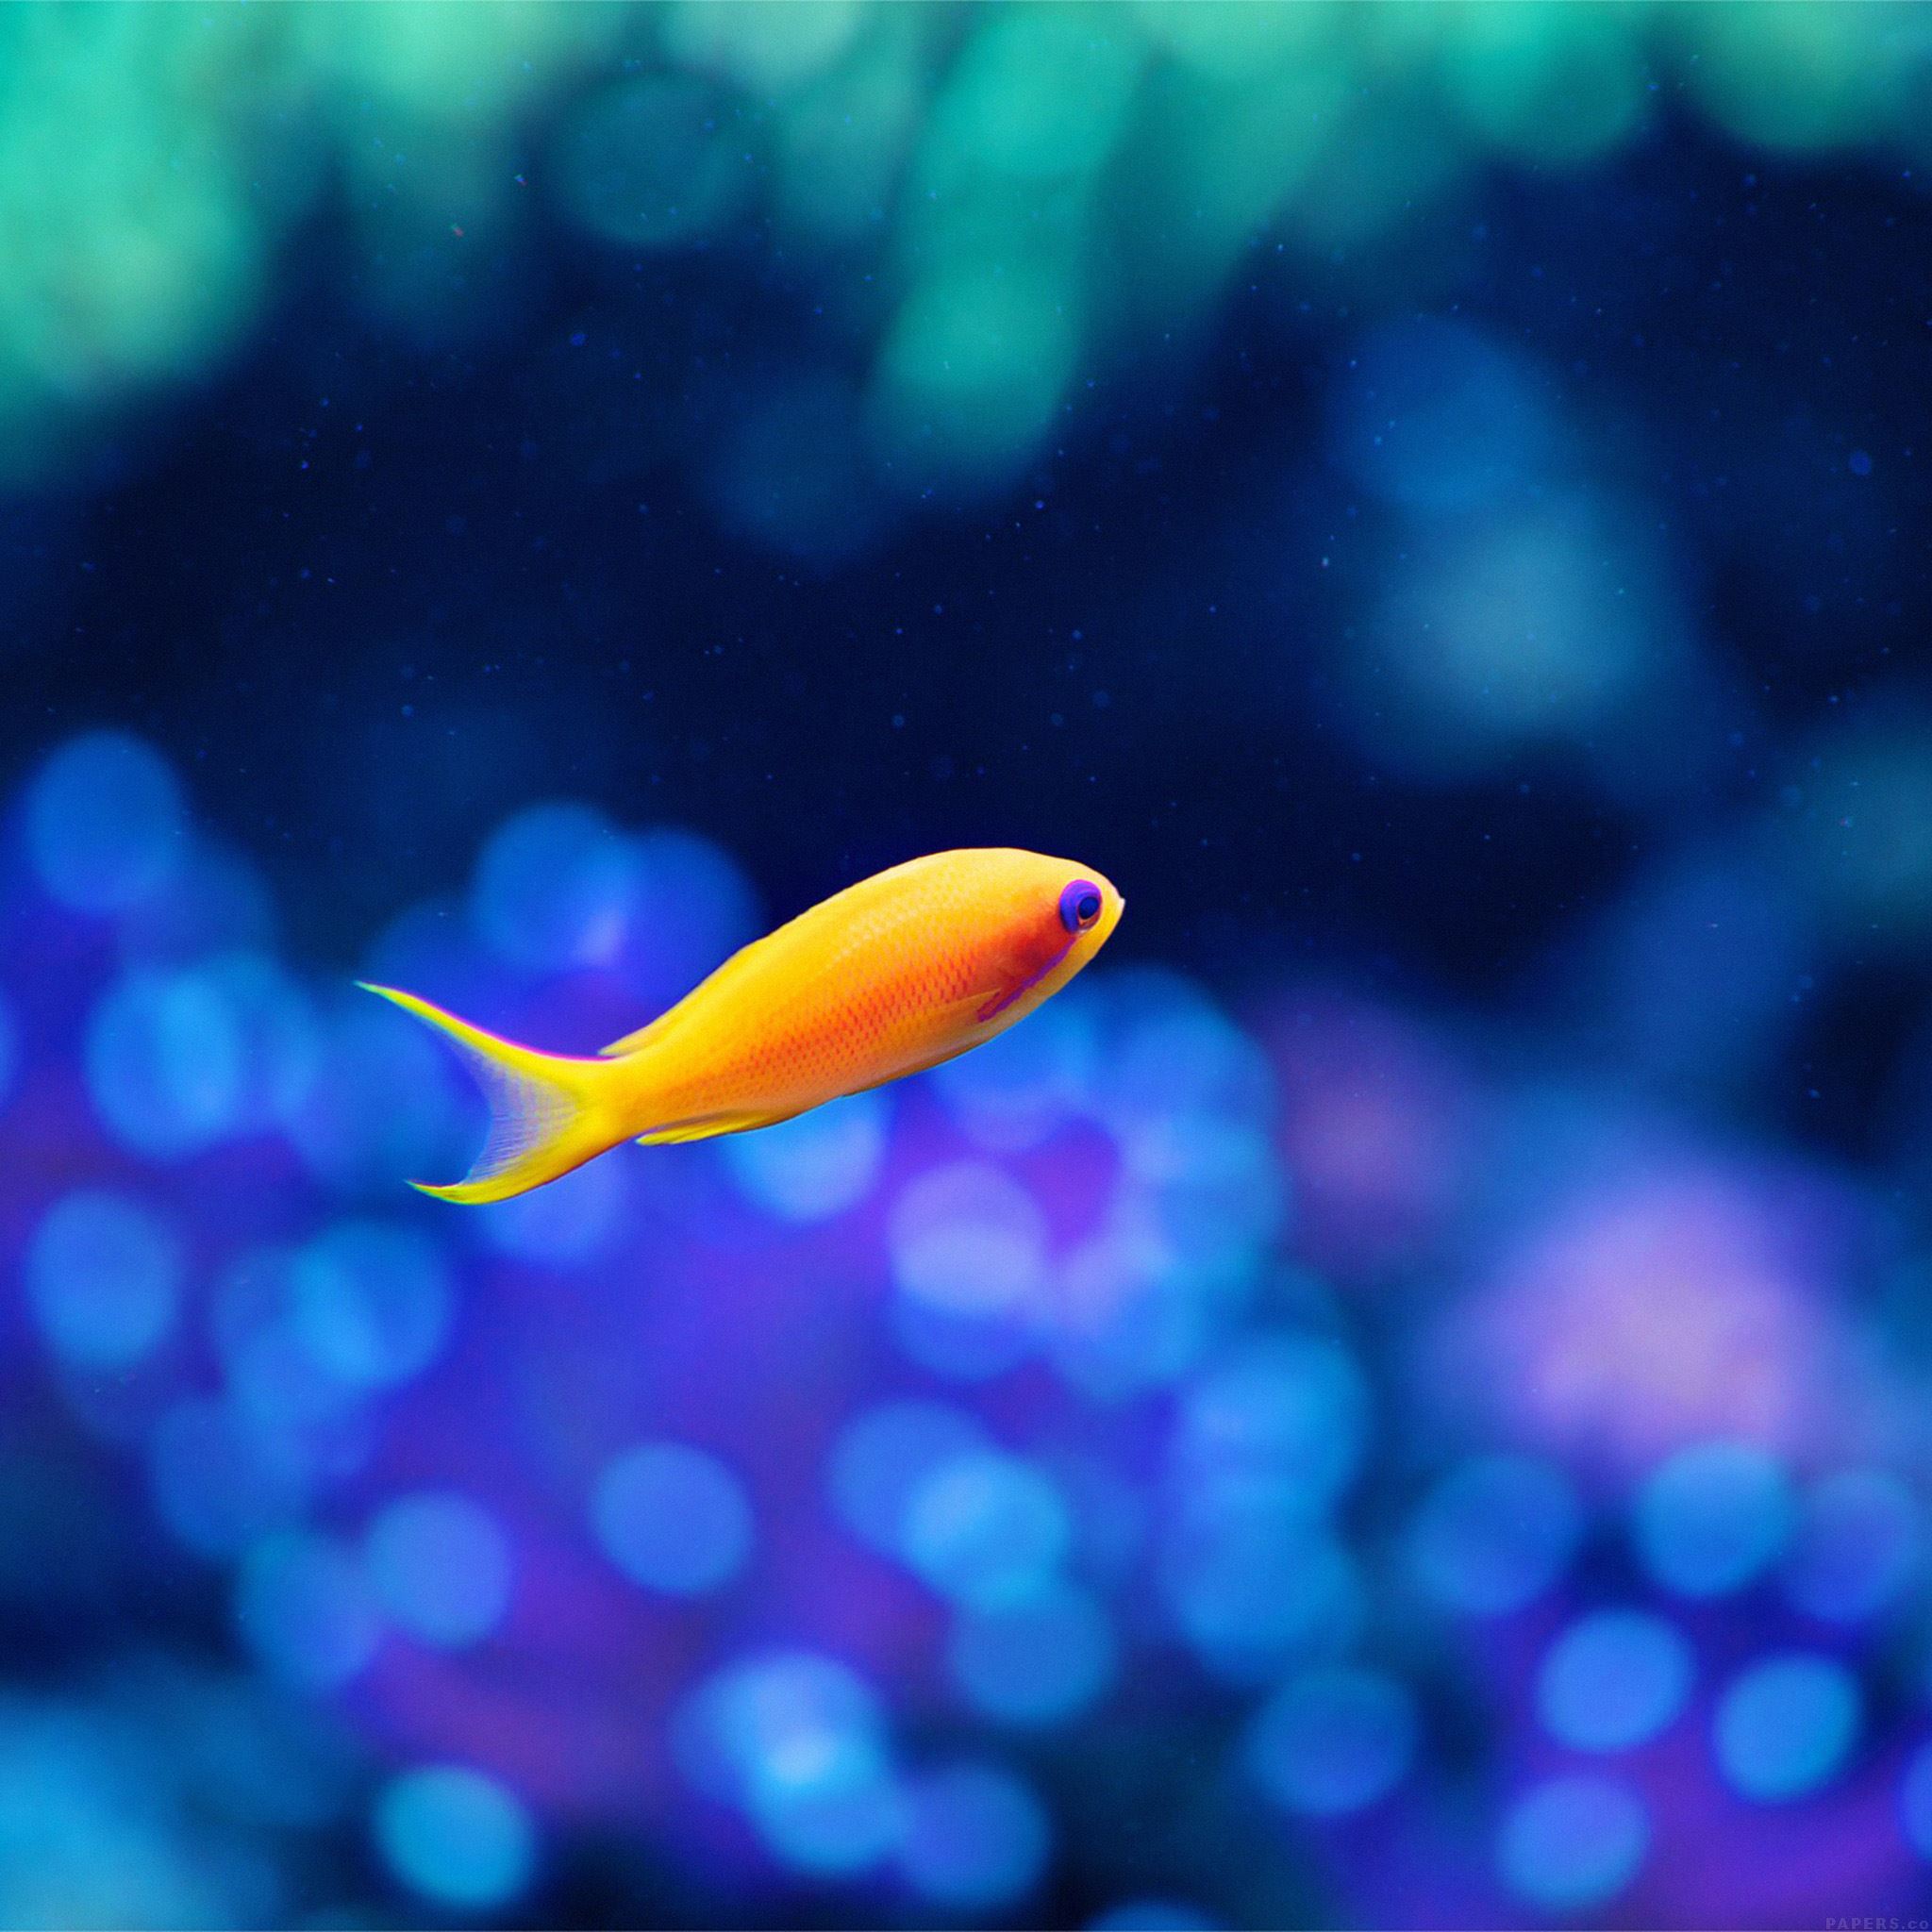 Fish Underwater Photos Download The BEST Free Fish Underwater Stock Photos   HD Images